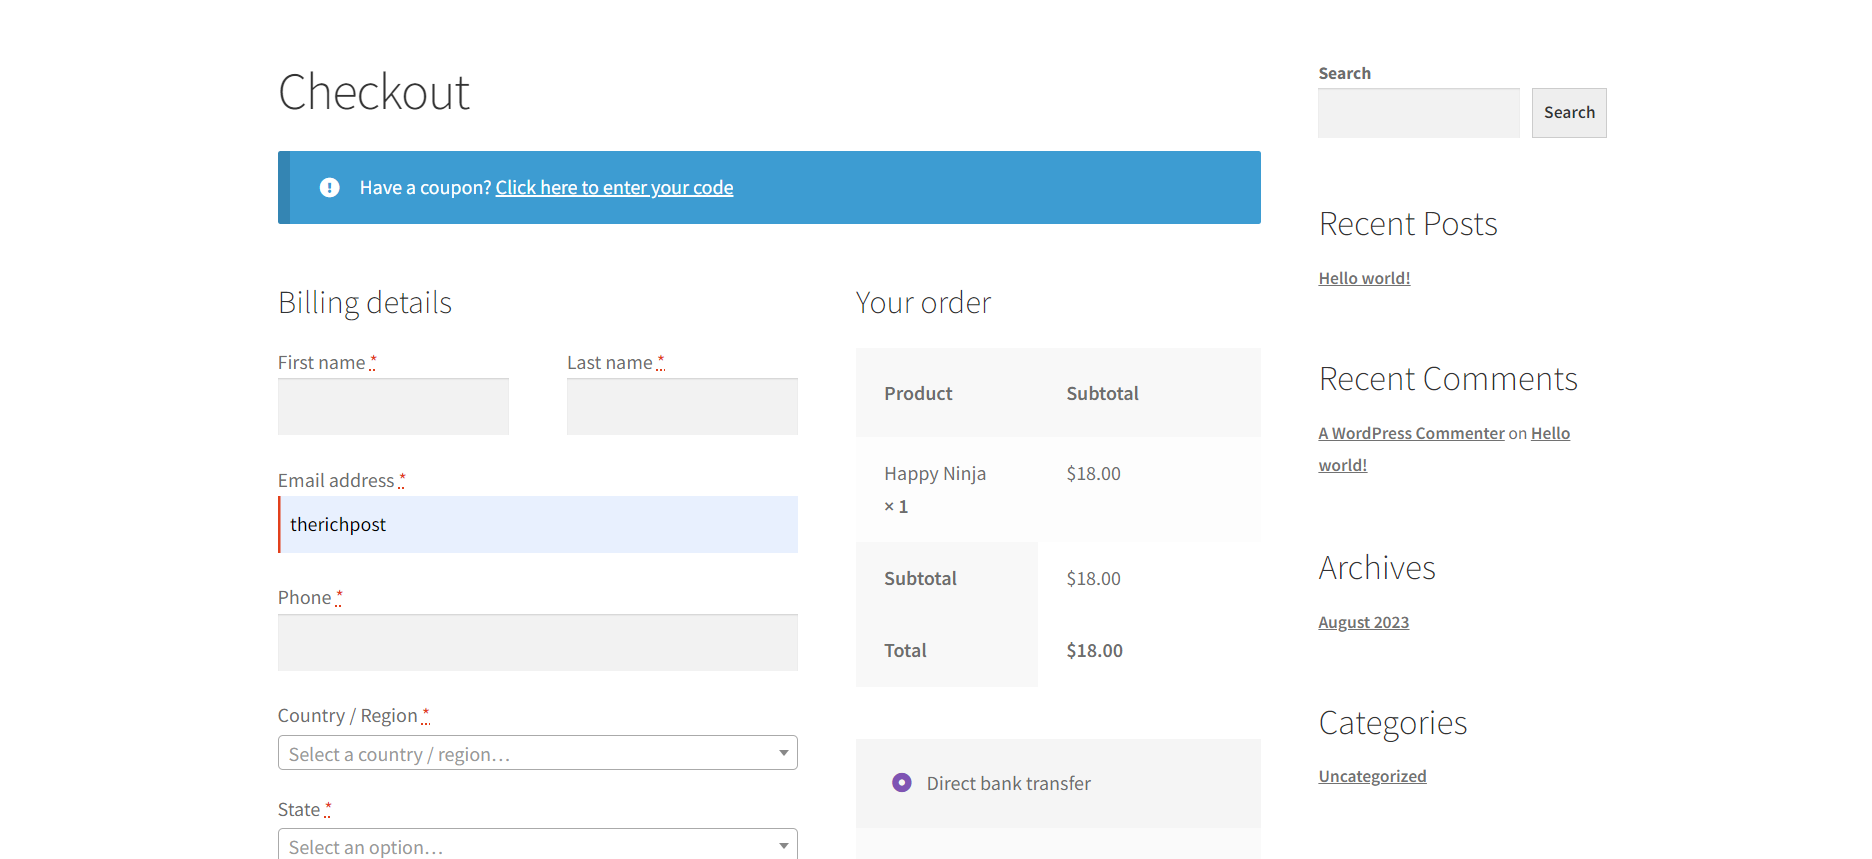 How to Change order of billing fields on checkout page Woocommerce?